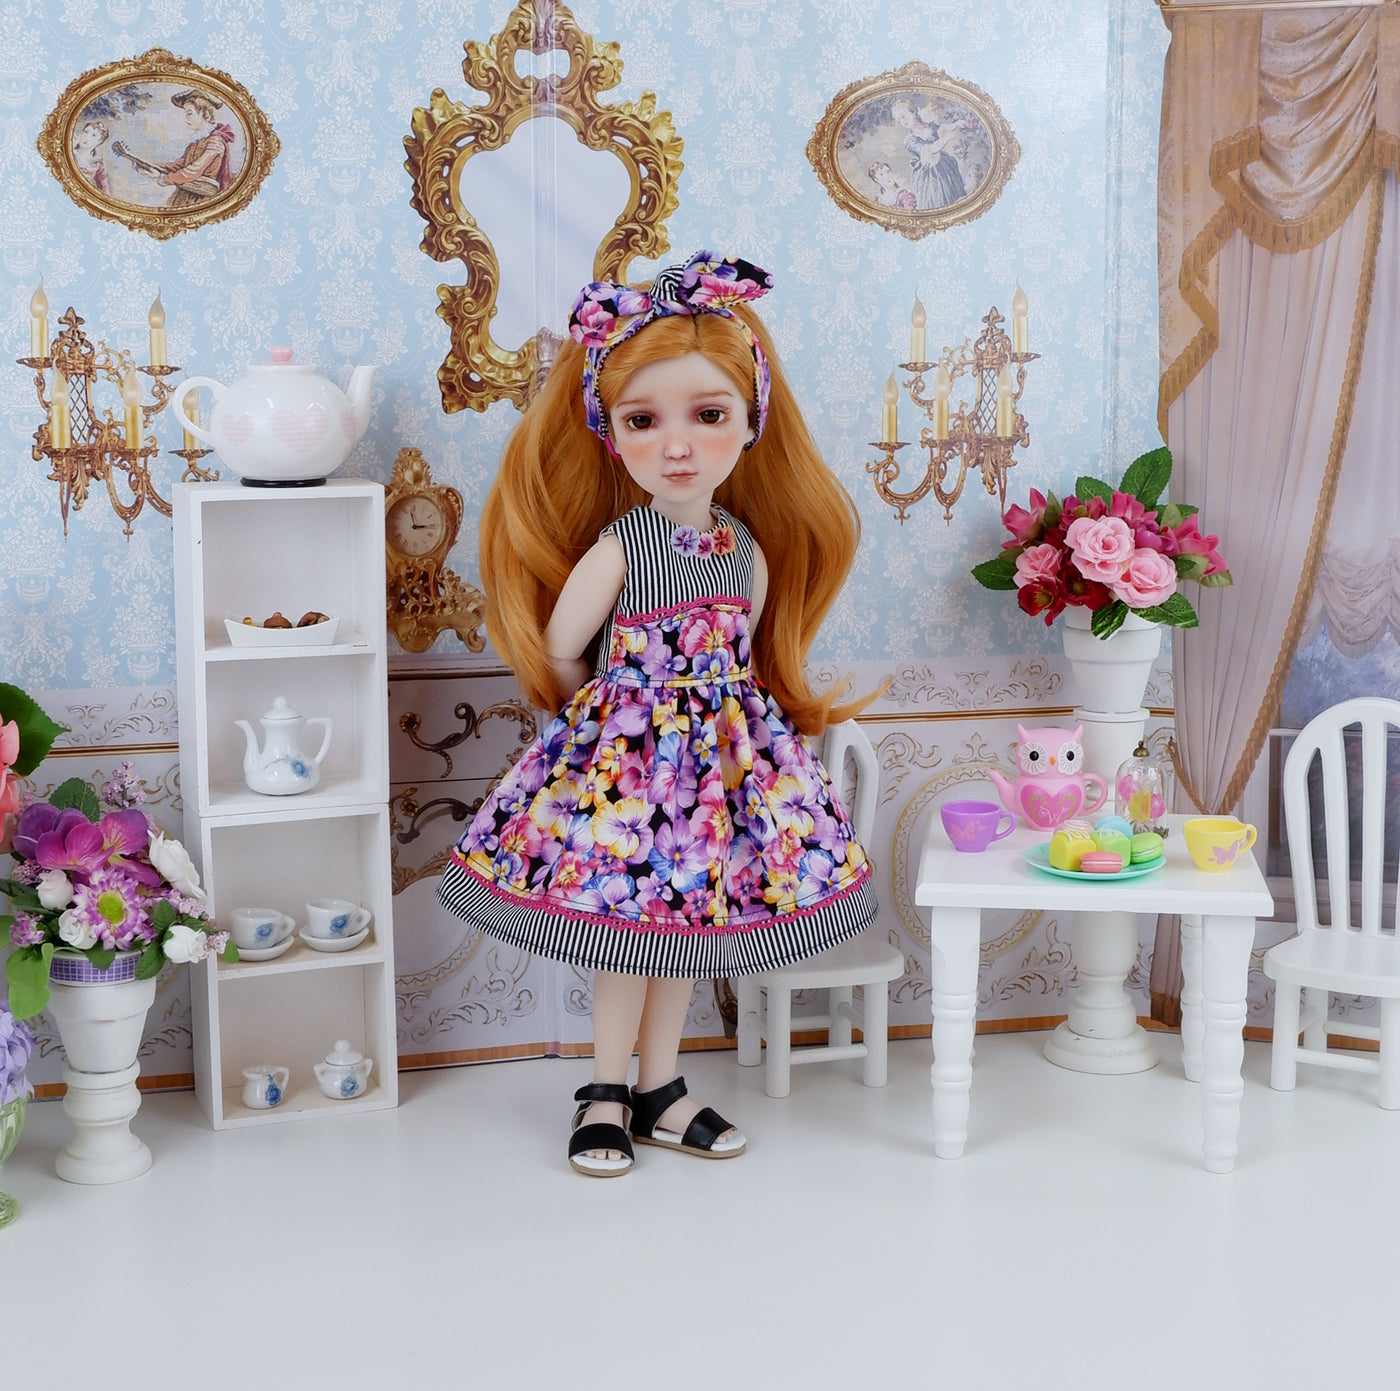 Blooming Pansies - dress and shoes for Ruby Red Fashion Friends doll